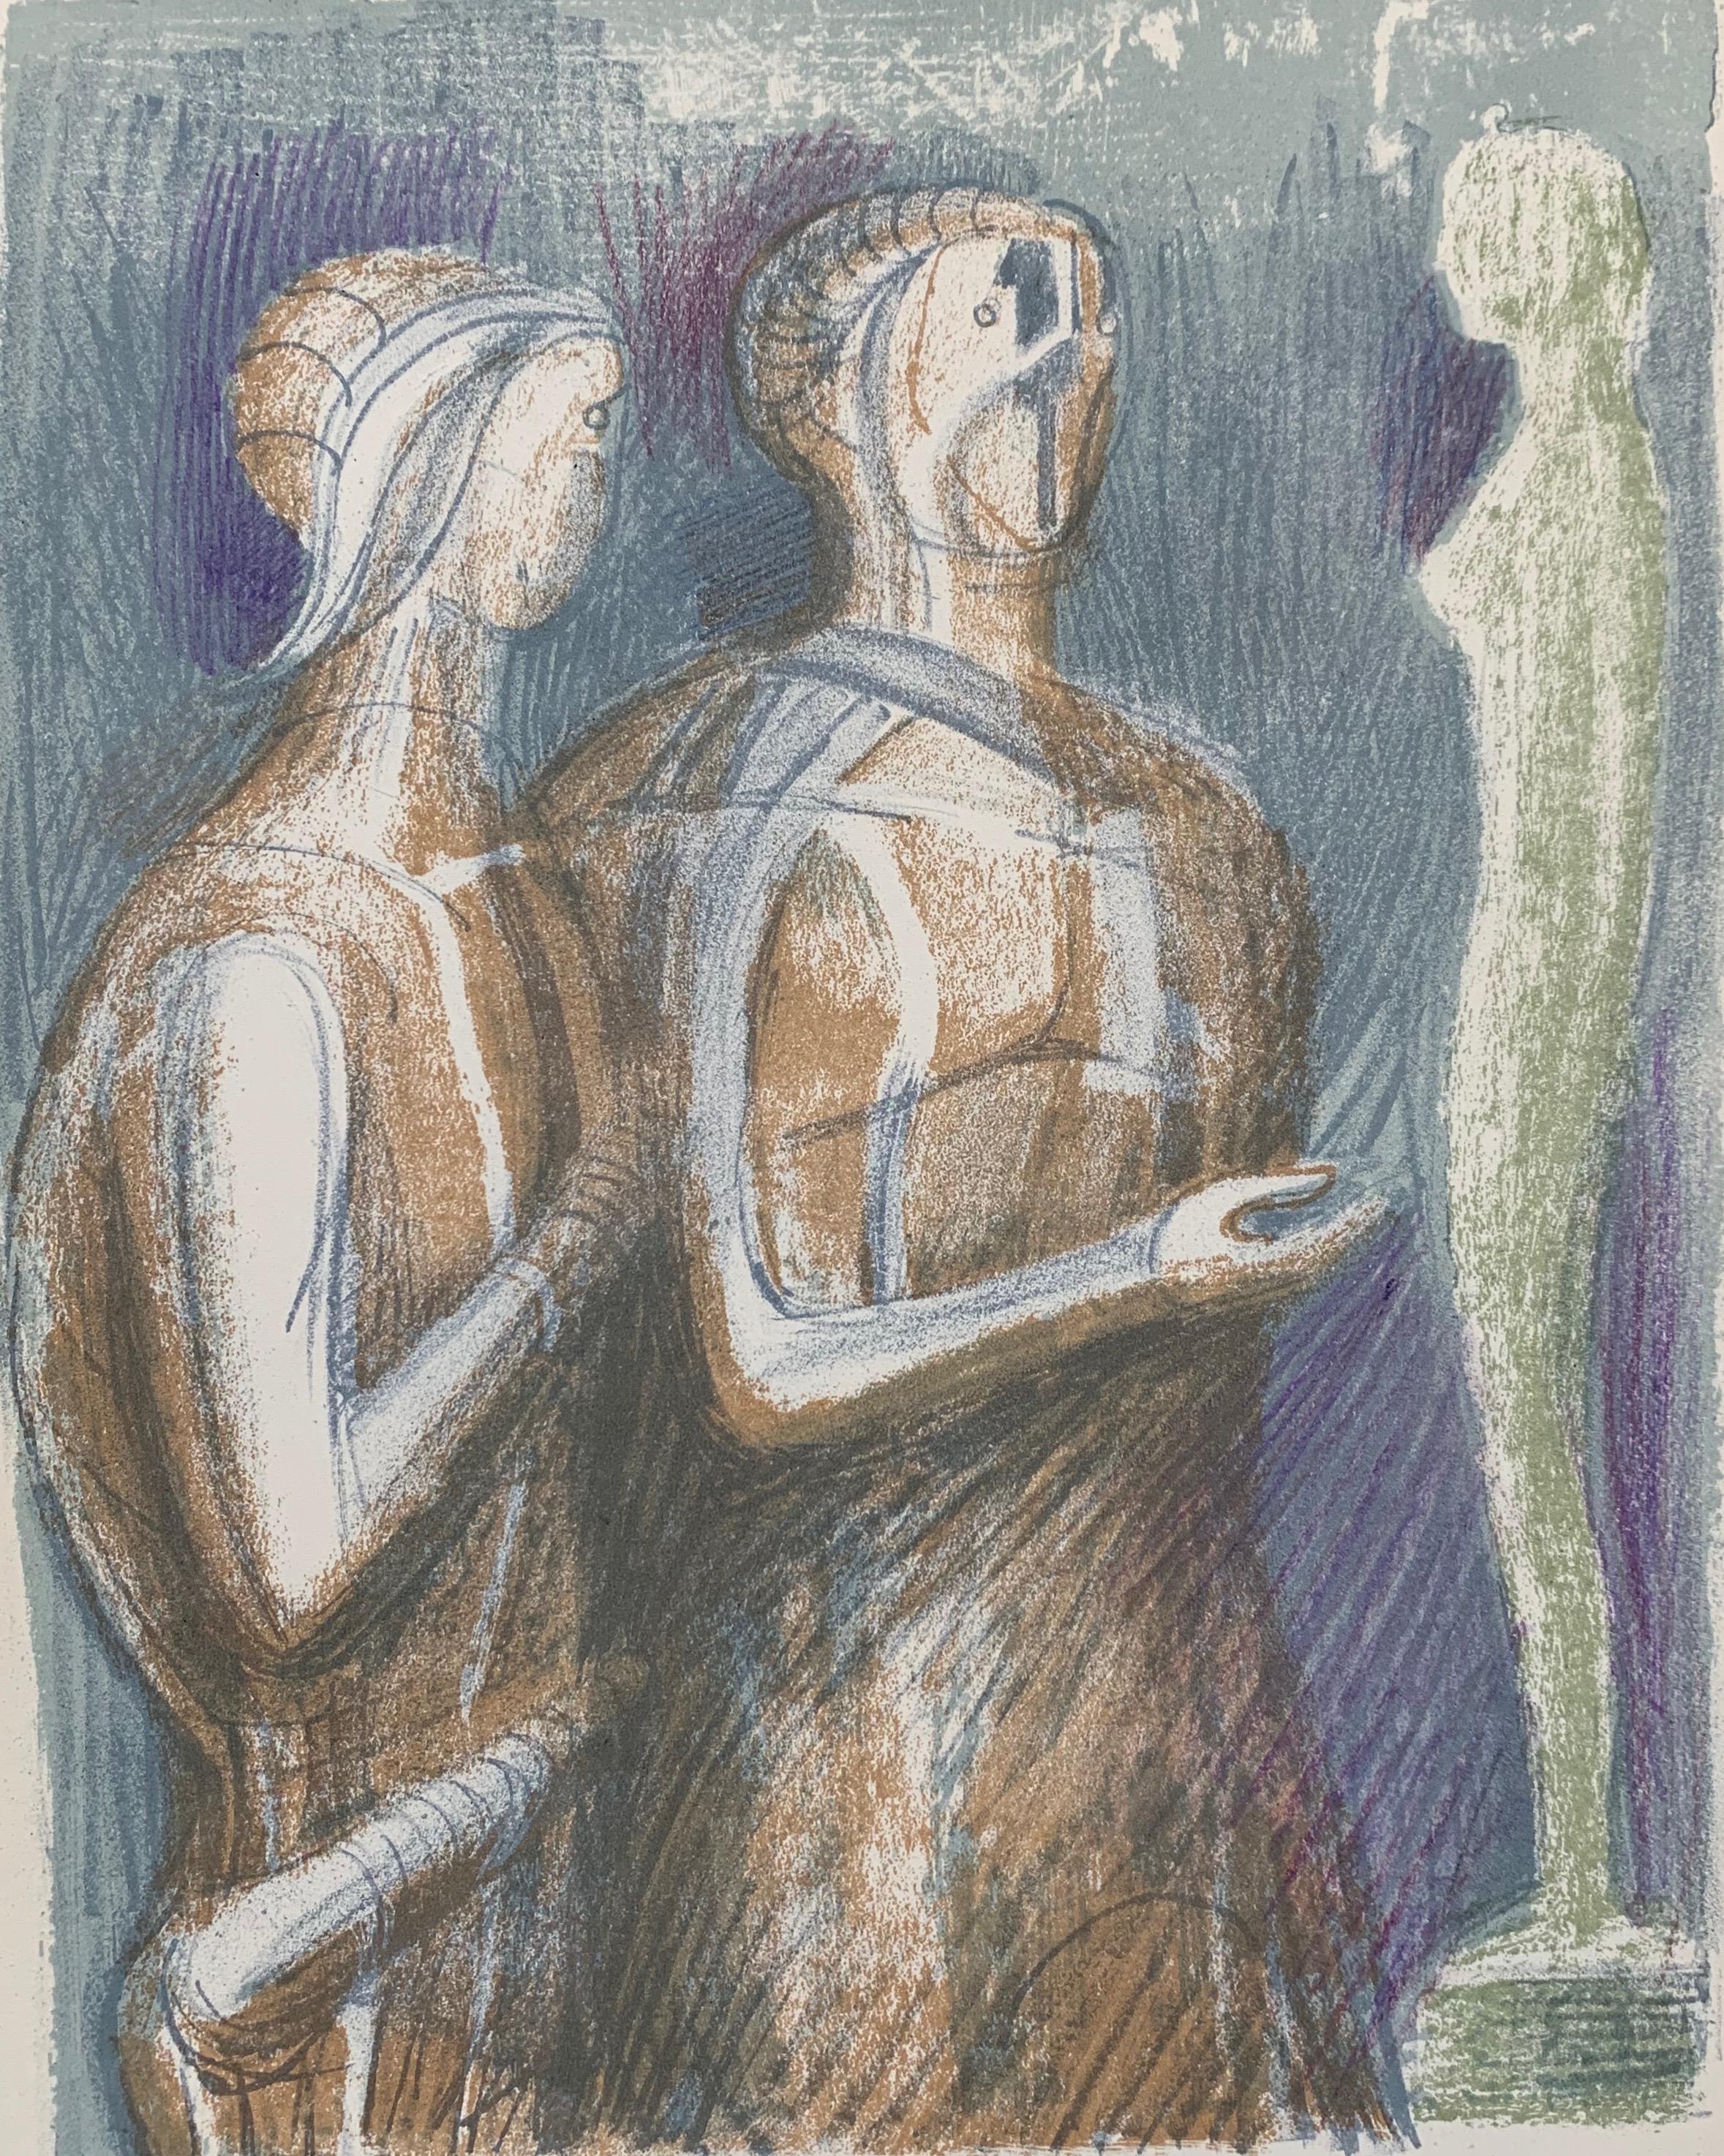 This piece is an original lithograph created by Henry Moore in 1950. It is from a portfolio entitled Promethee, which contained lithographic illustrations by Moore. This was published in an edition of 183, of the edition only 18 were signed. This